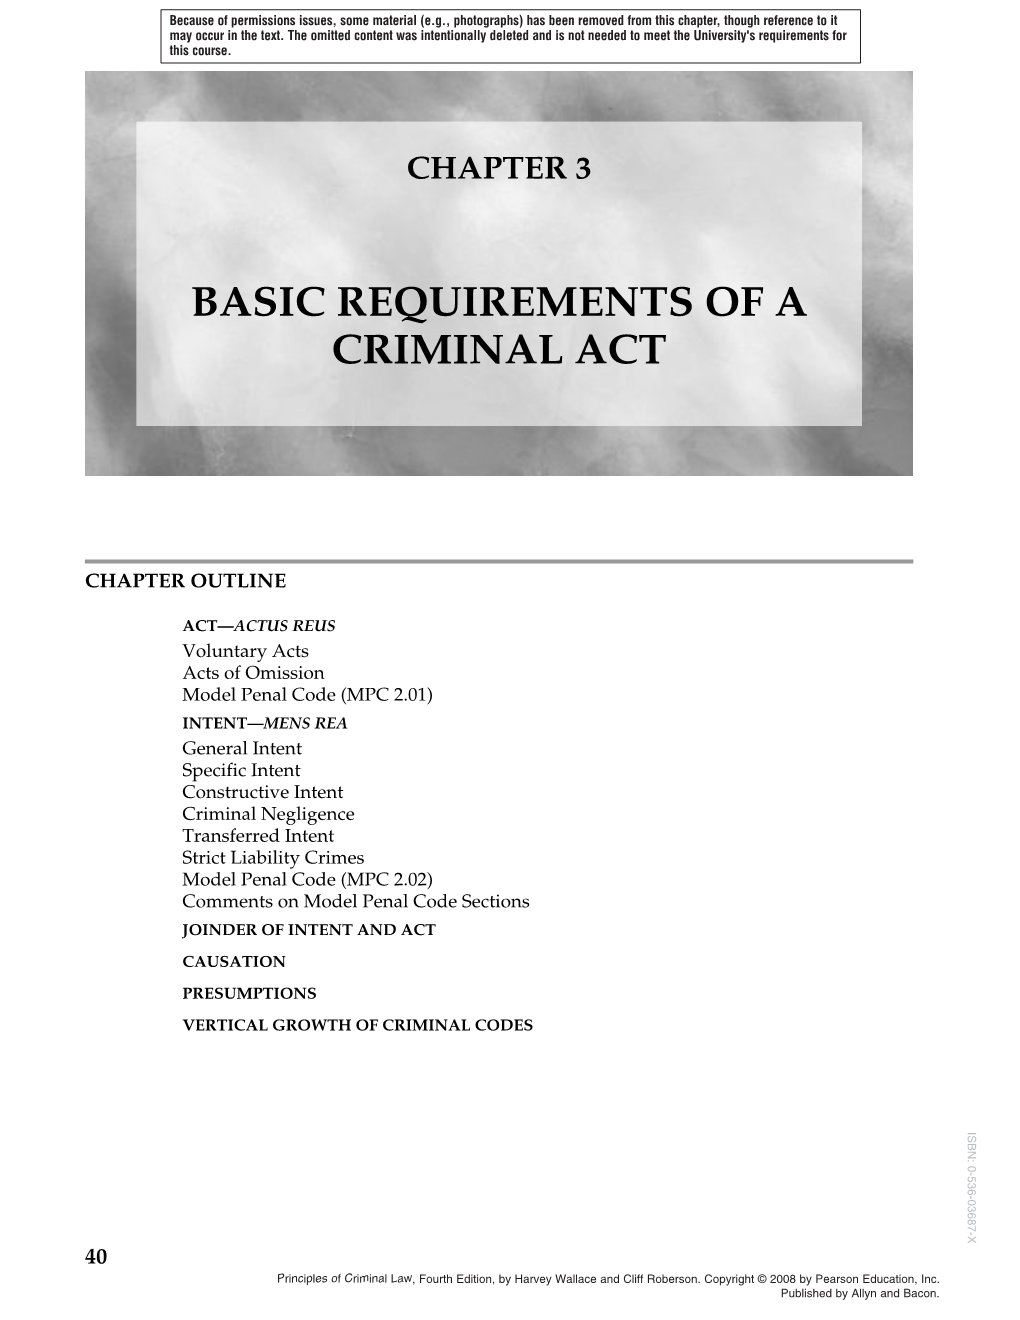 Basic Requirements of a Criminal Act